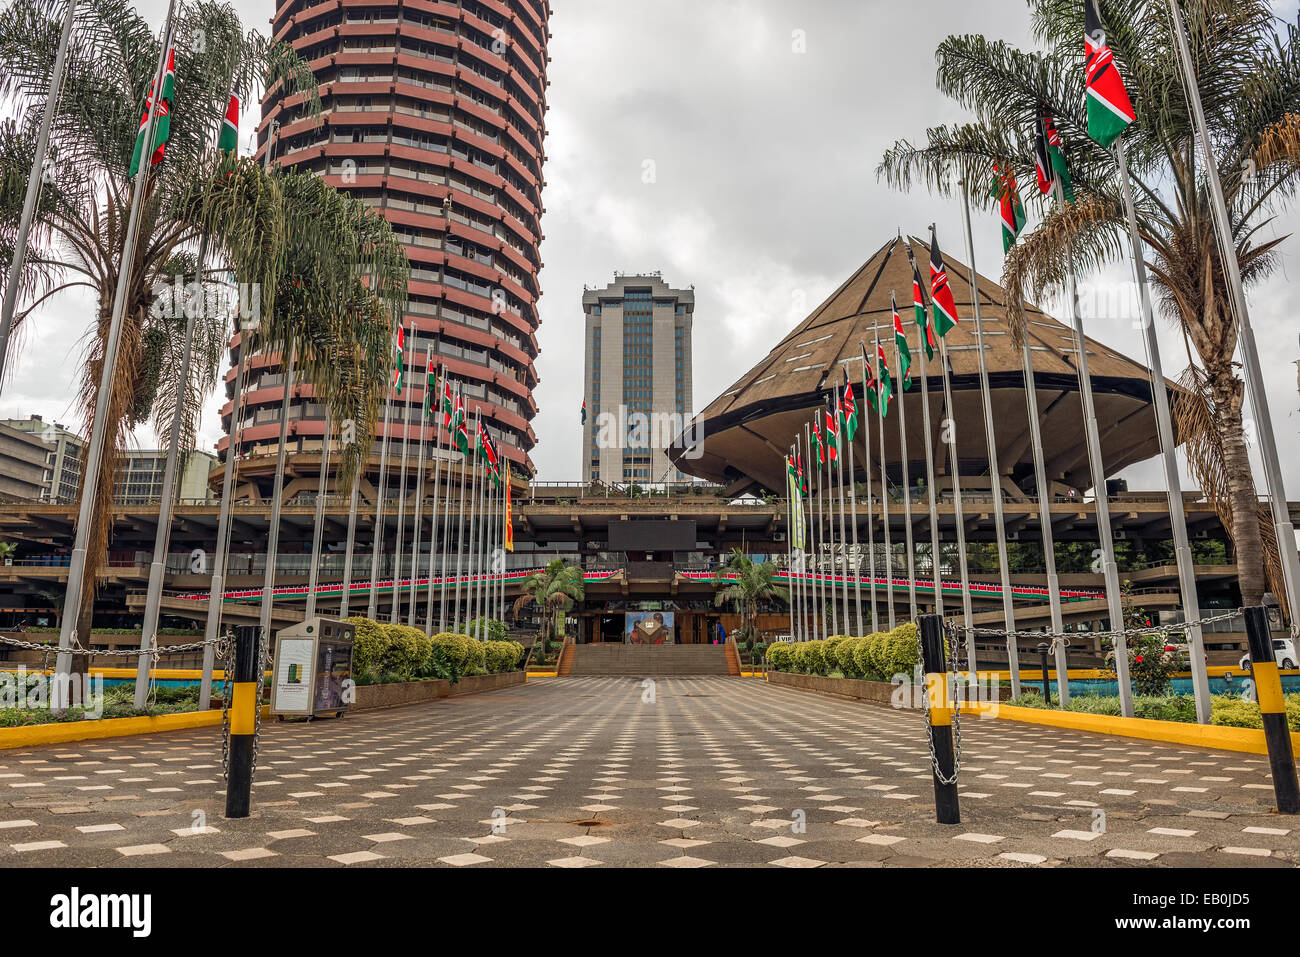 Kenyatta International Conference Centre located in the central business district of Nairobi Stock Photo